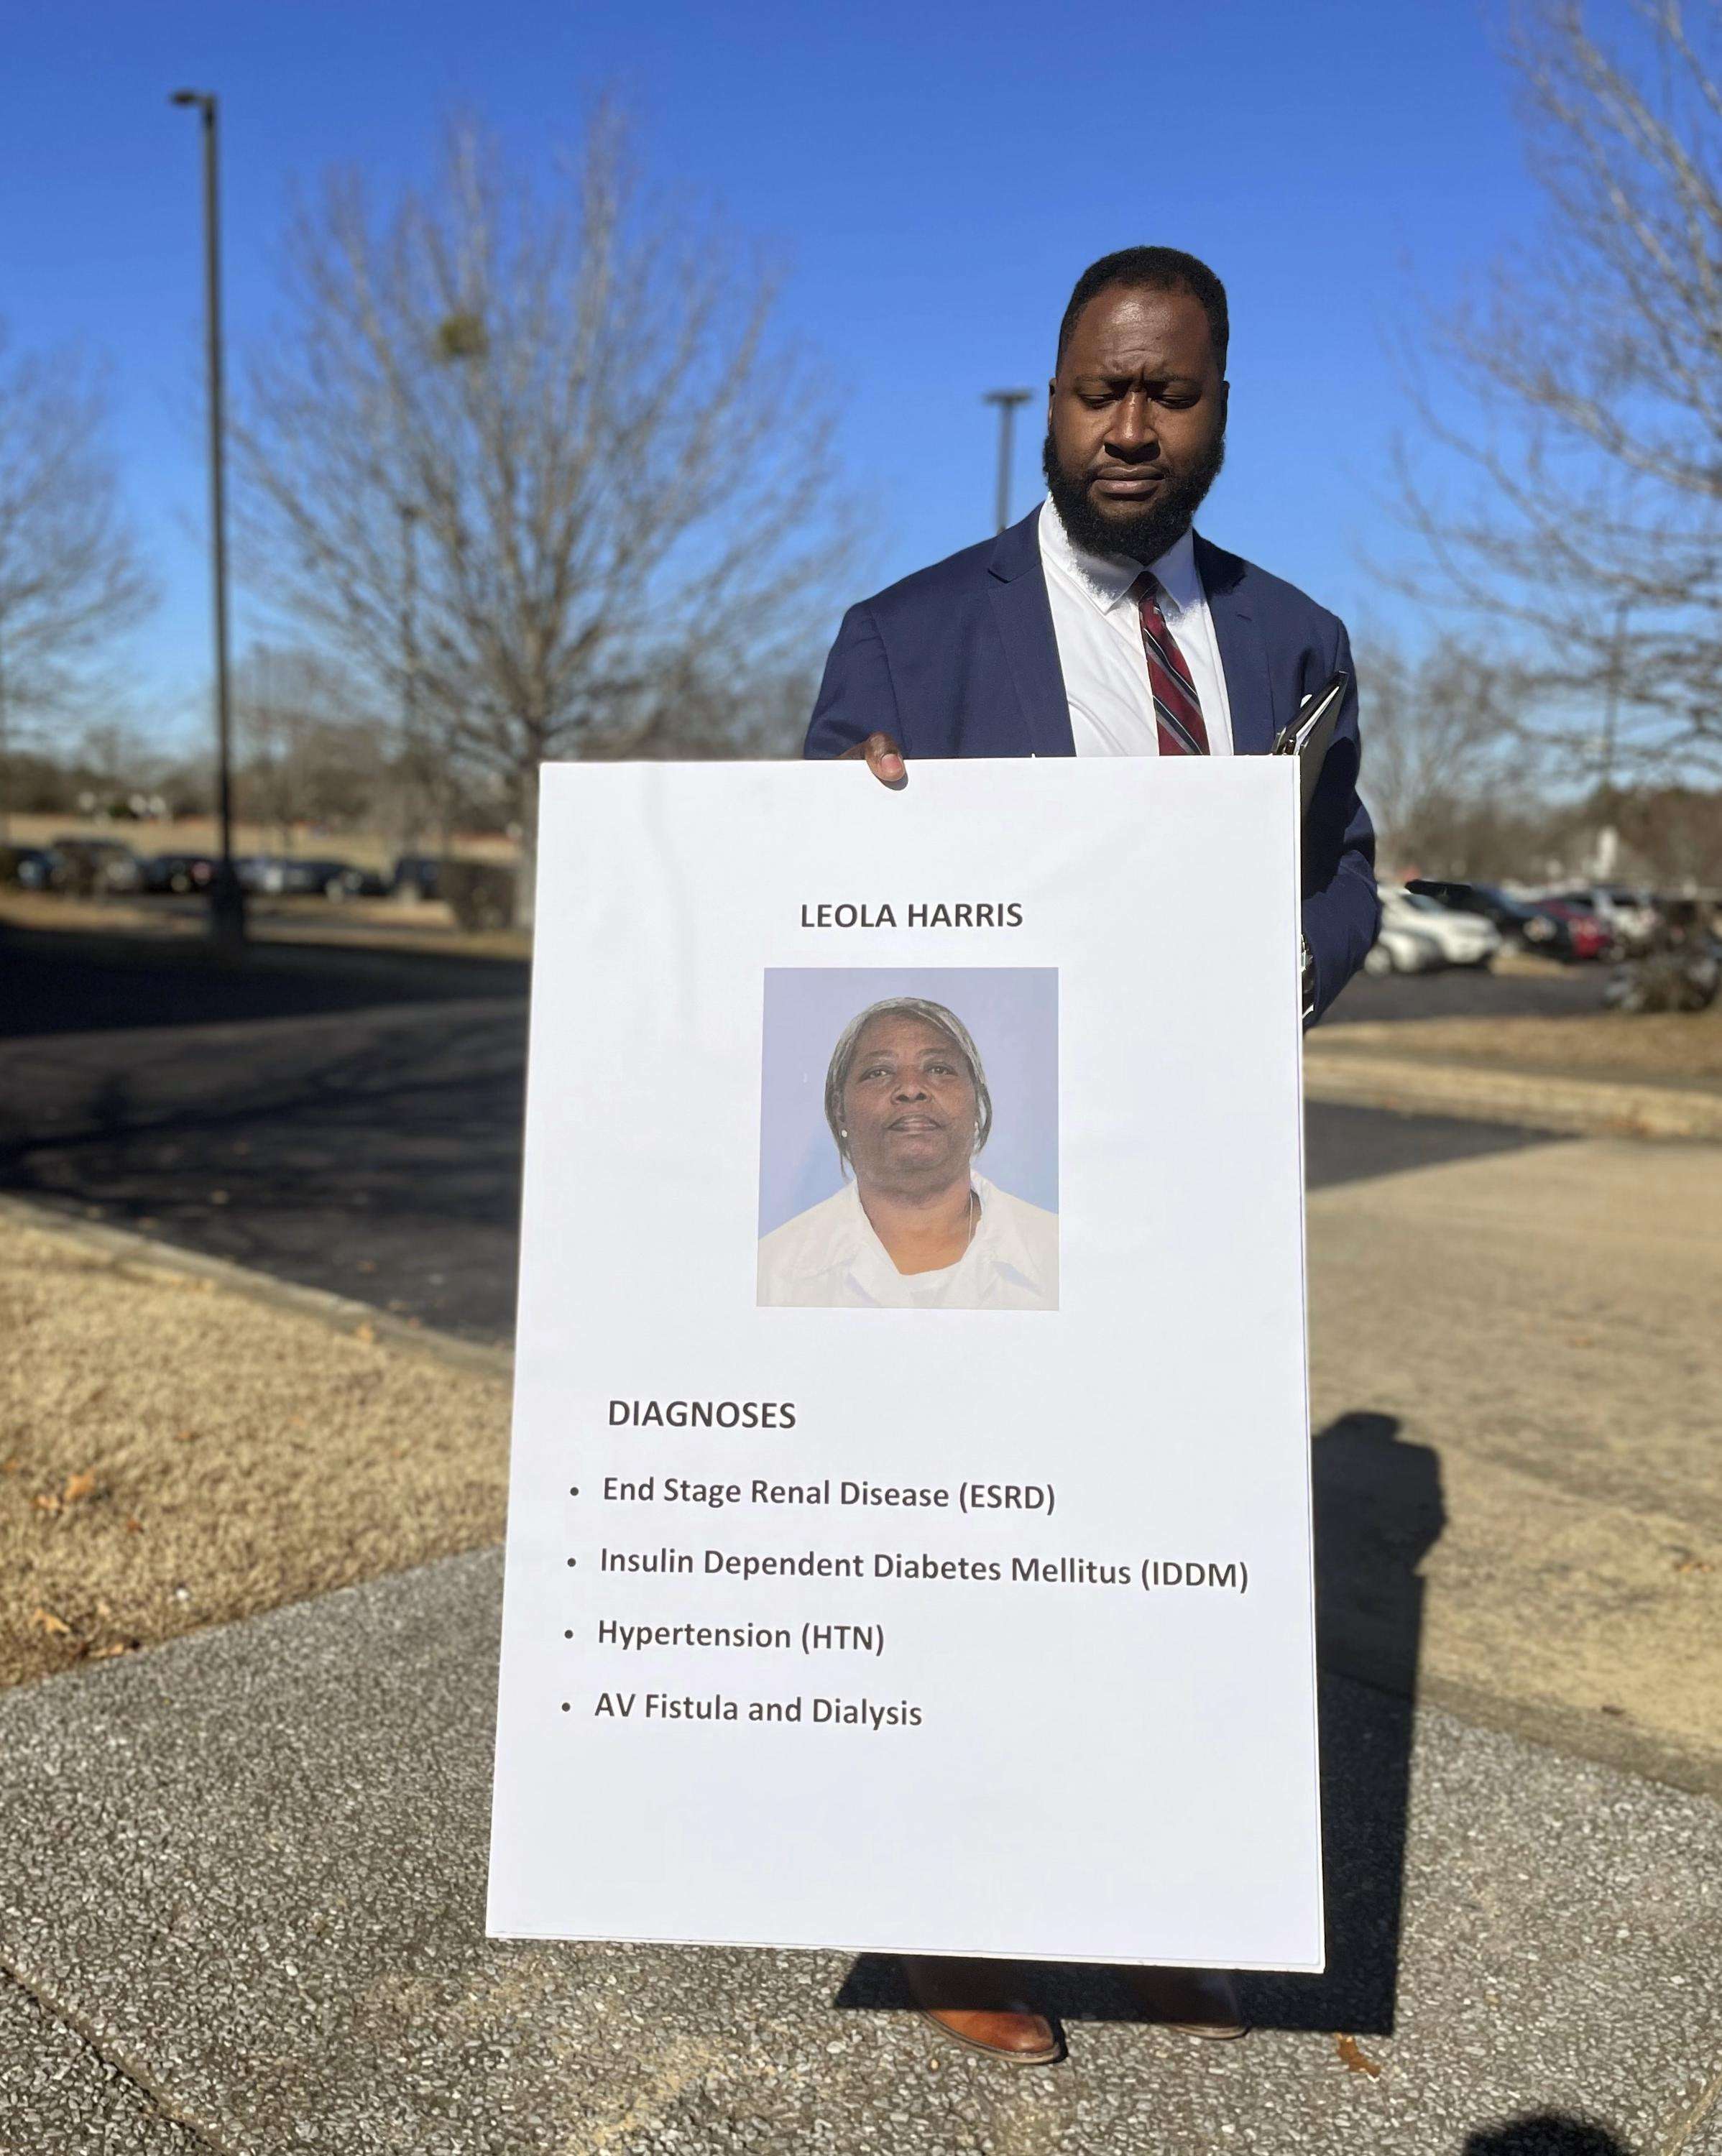 image for Parole denied for 90% of Alabama inmates, a new low